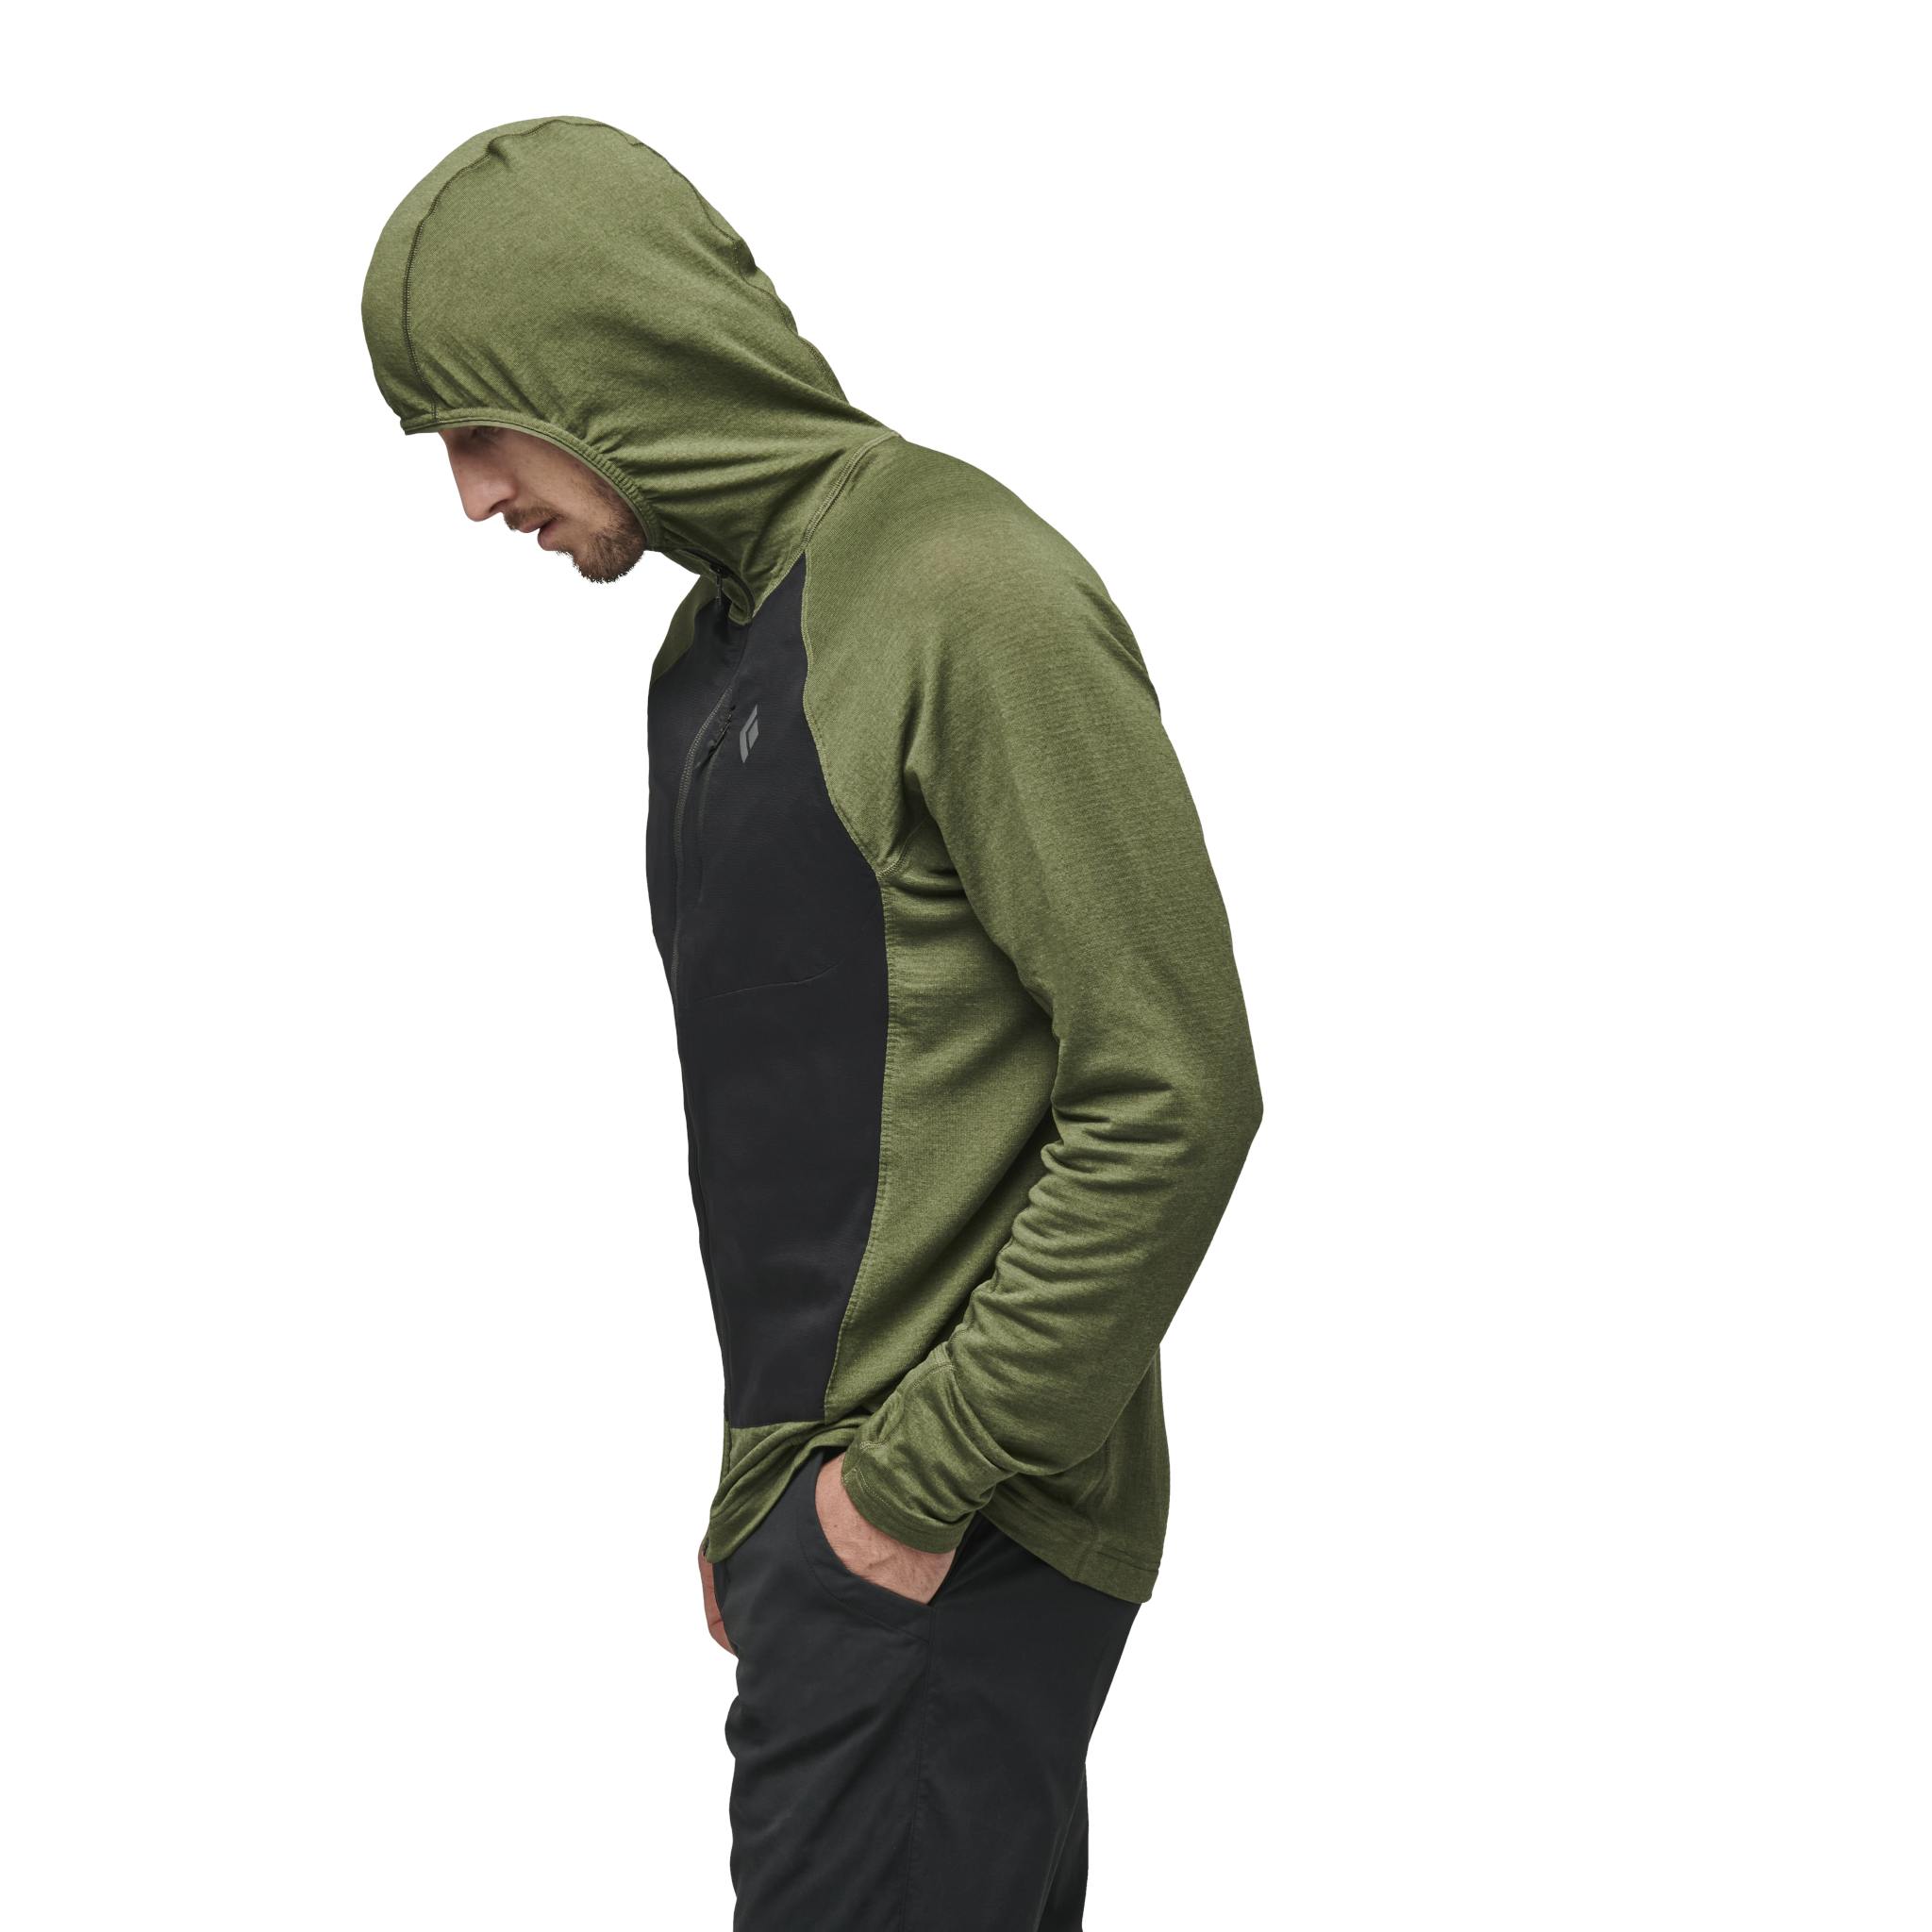 A model side view of the Coefficient LT Hybrid Hoody